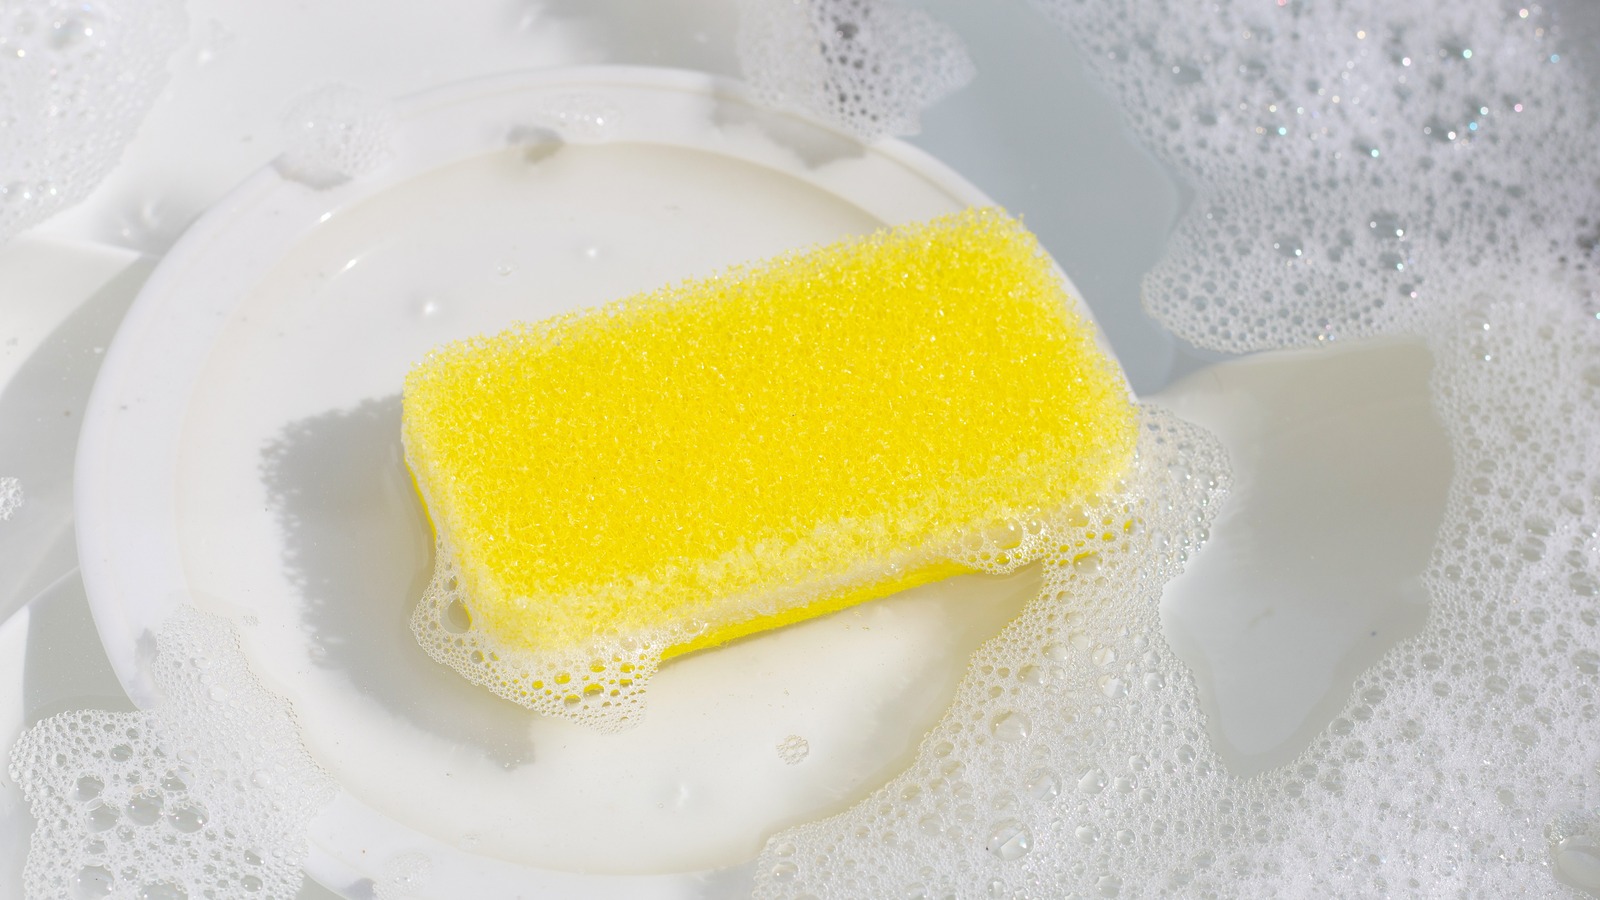 Microwaving Your Sponge Does Way More Harm Than Good